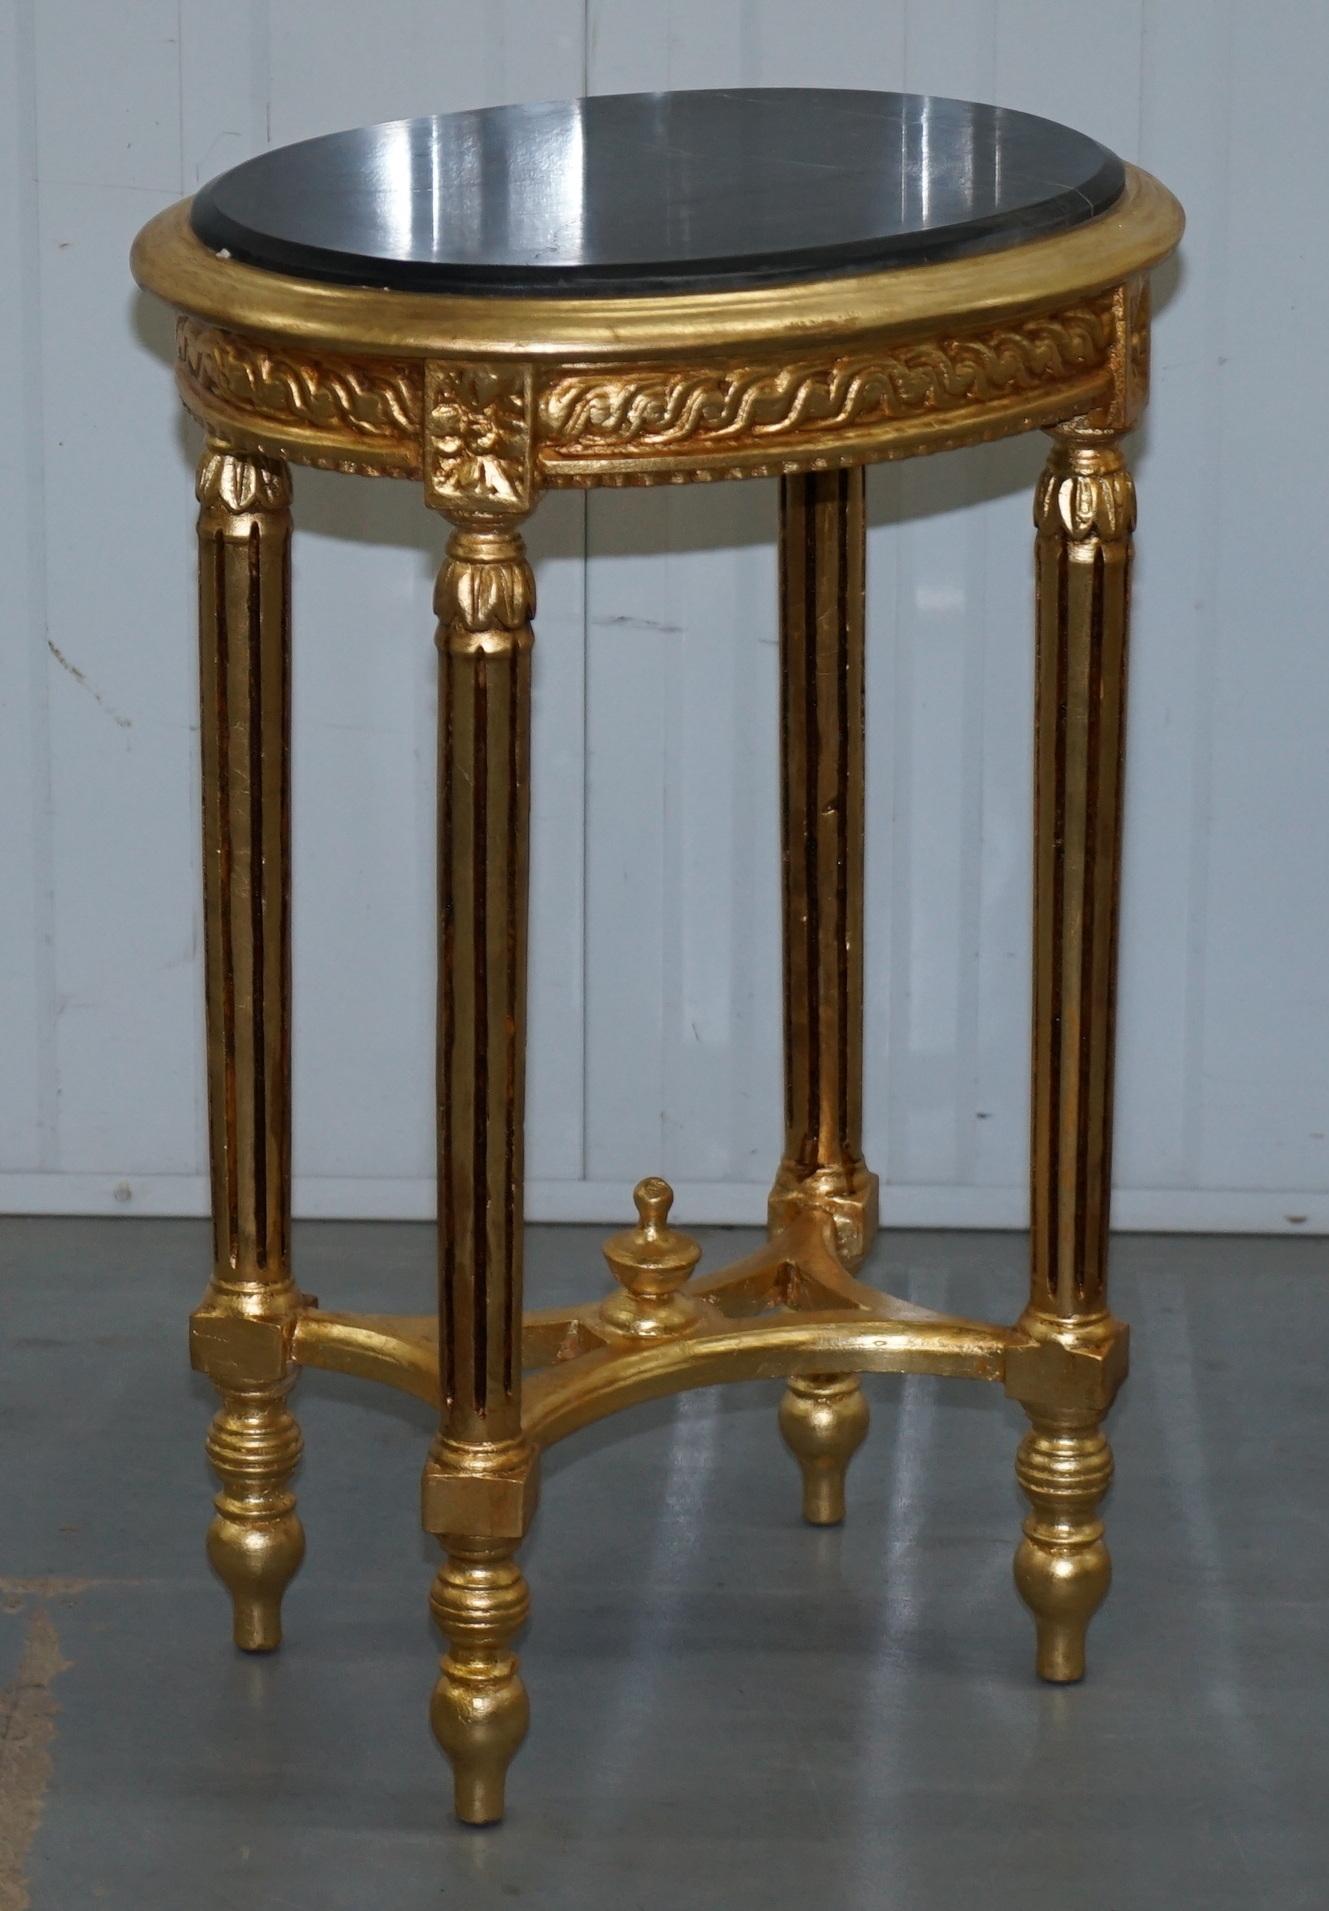 Wimbledon-Furniture

Wimbledon-Furniture is delighted to offer for sale this stunning pair of antique French Giltwood with black Marble tops Jardinière stands

Please note the delivery fee listed is just a guide, it covers within the M25 only,